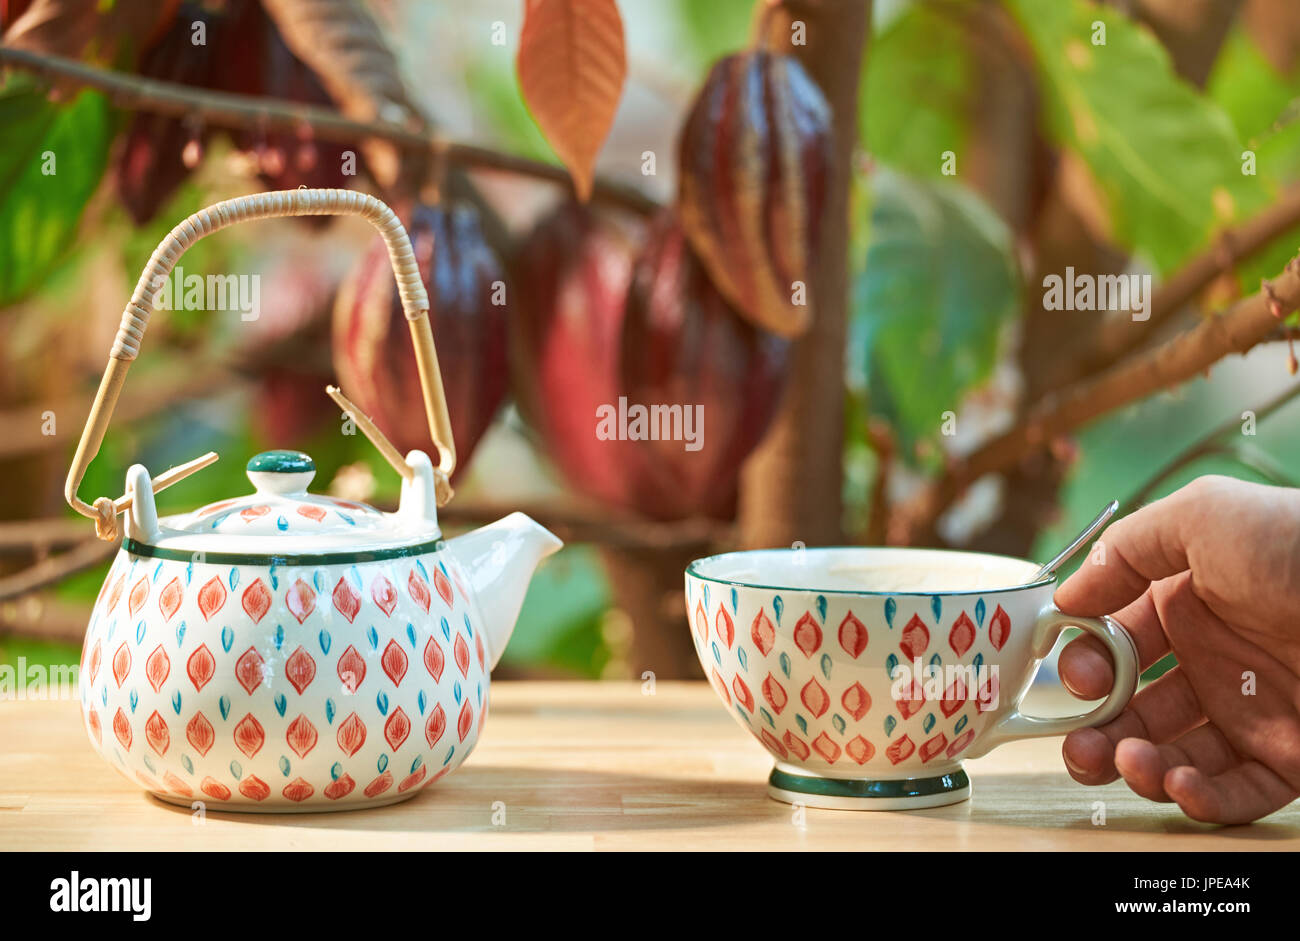 Hand hold cup with hot chocolate drink on blurred cocoa pods background Stock Photo